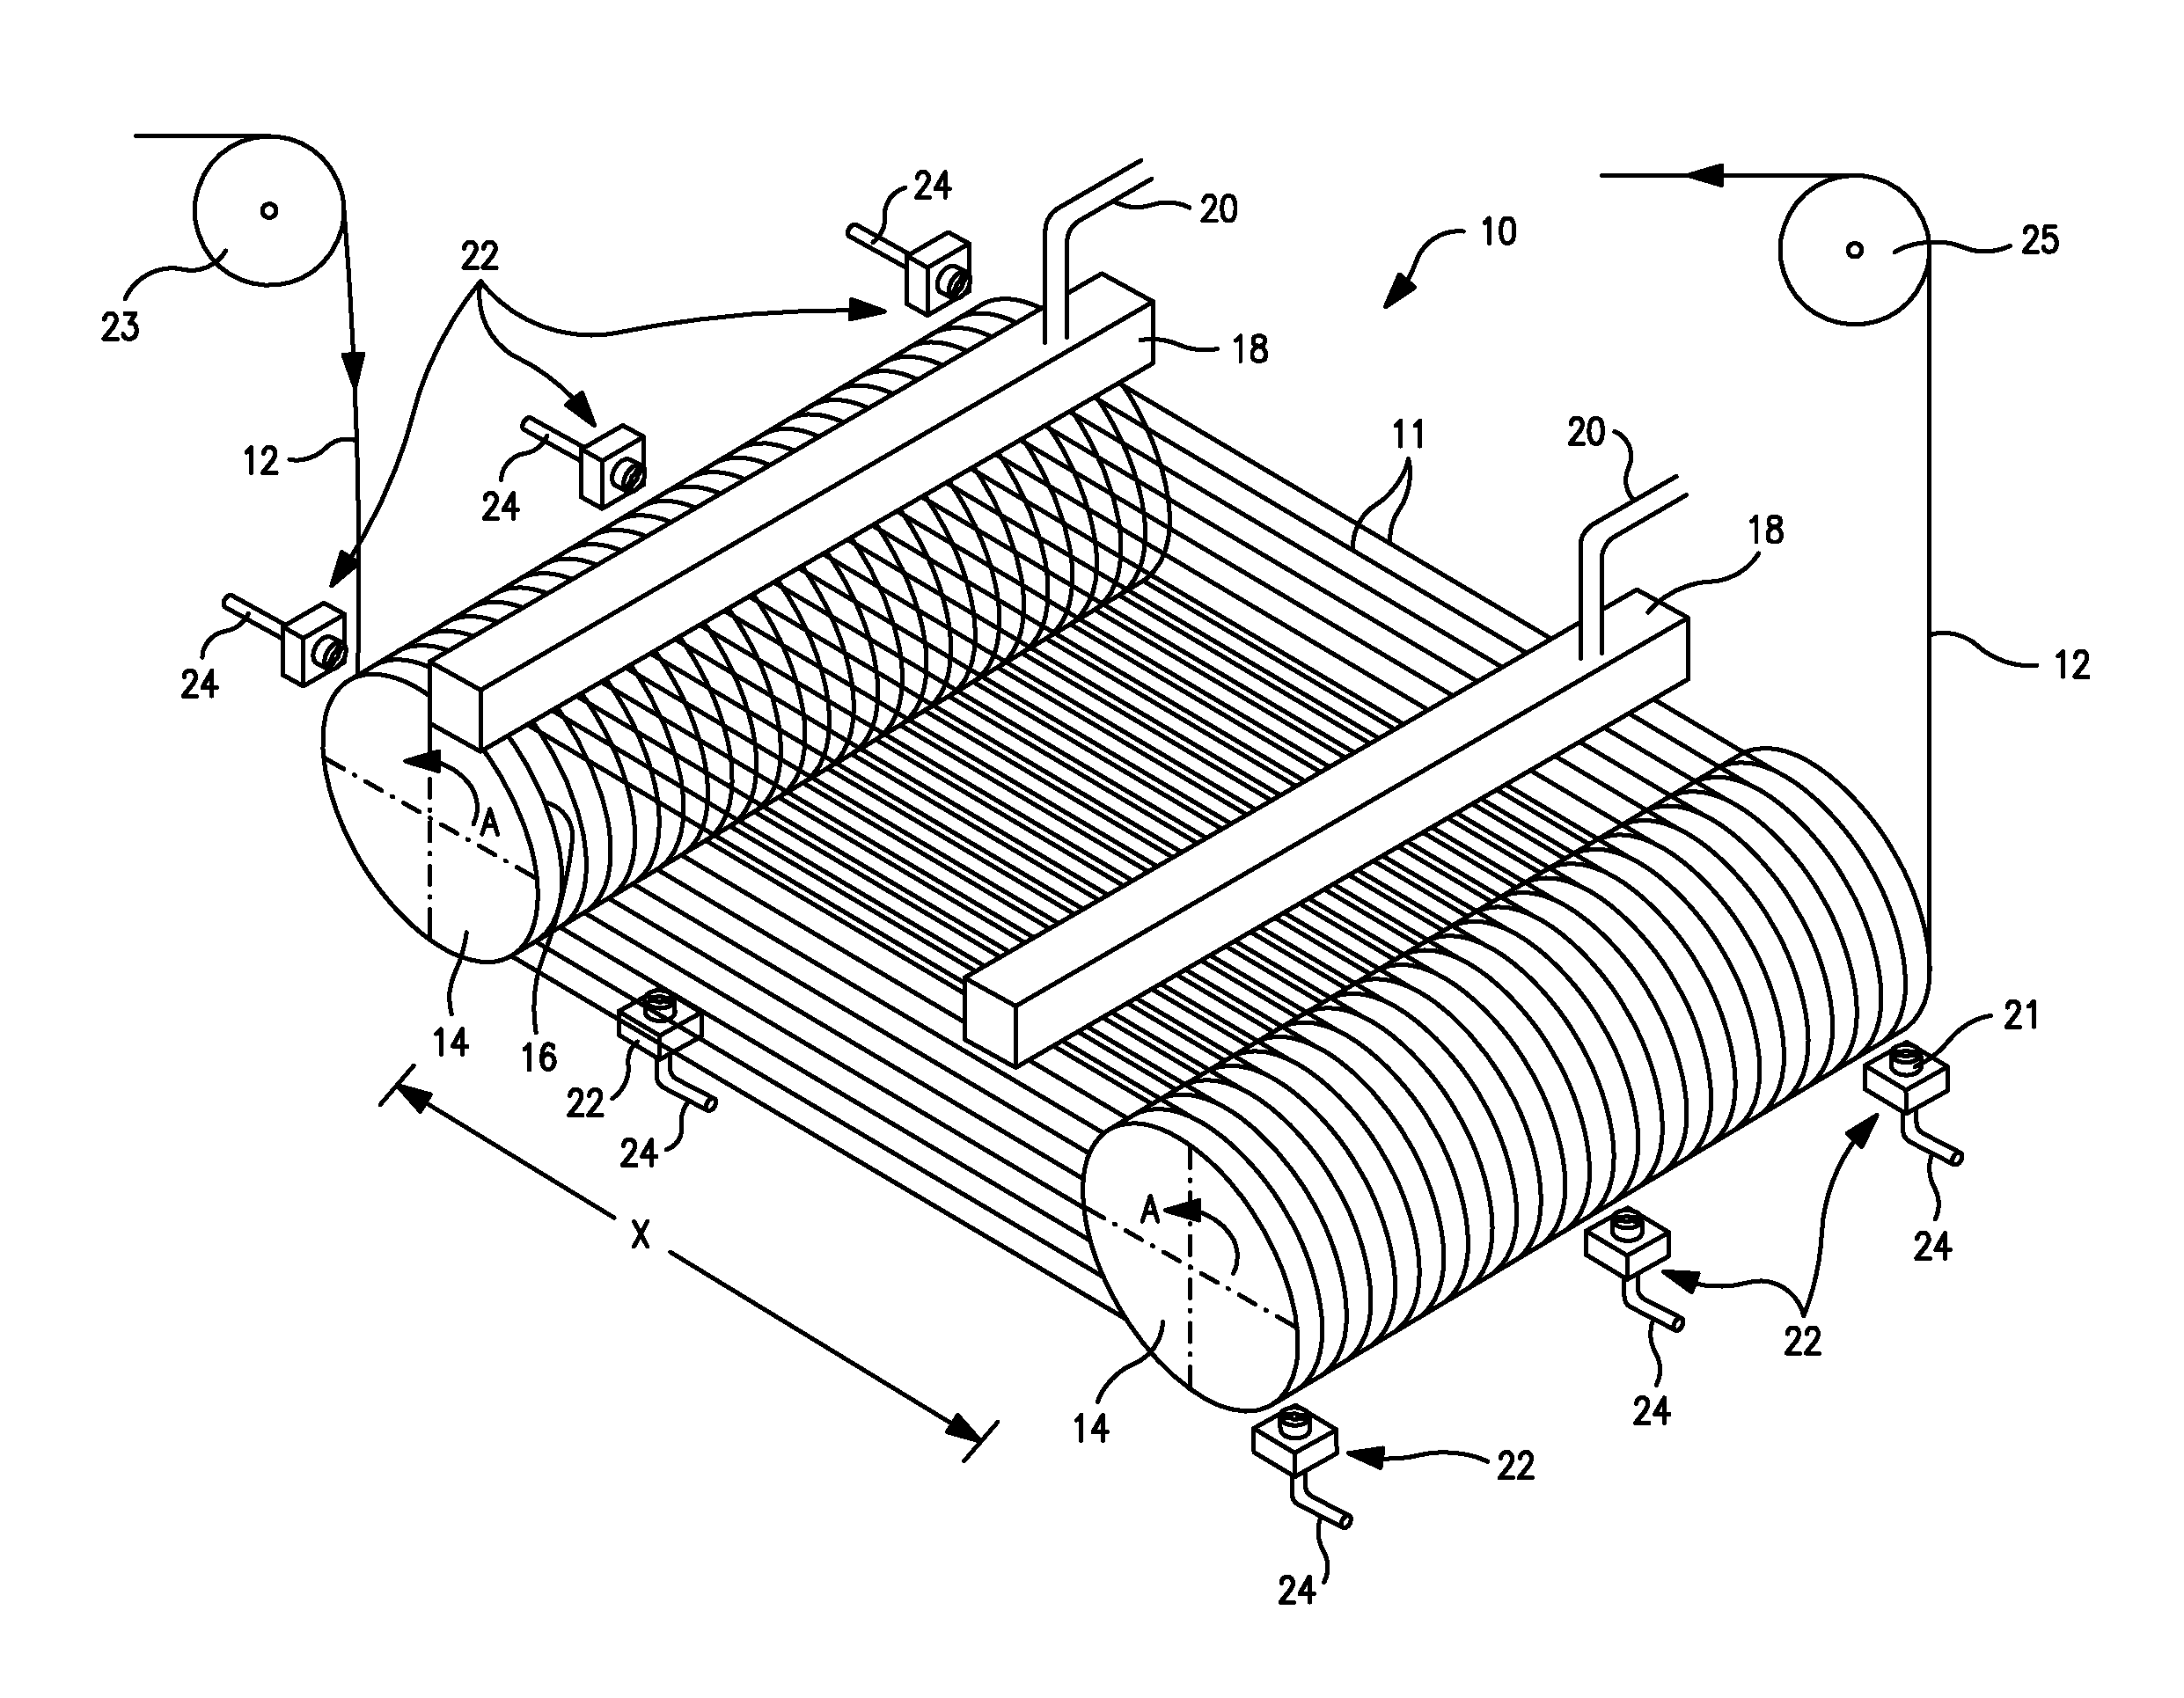 Self-cleaning wiresaw apparatus and method